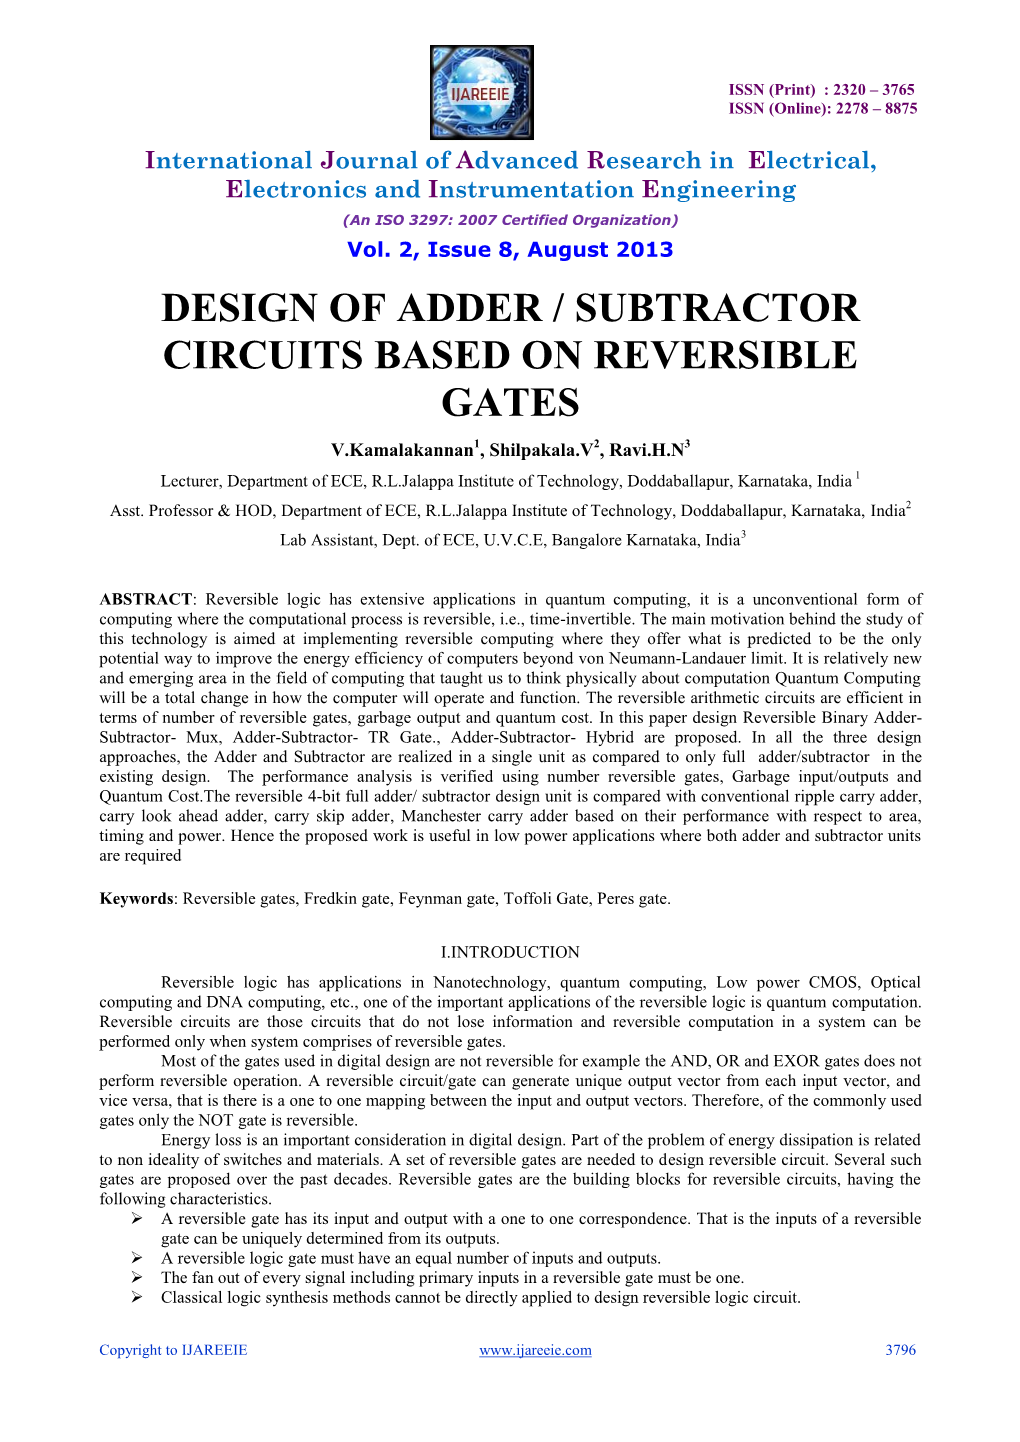 Design of Adder / Subtractor Circuits Based On